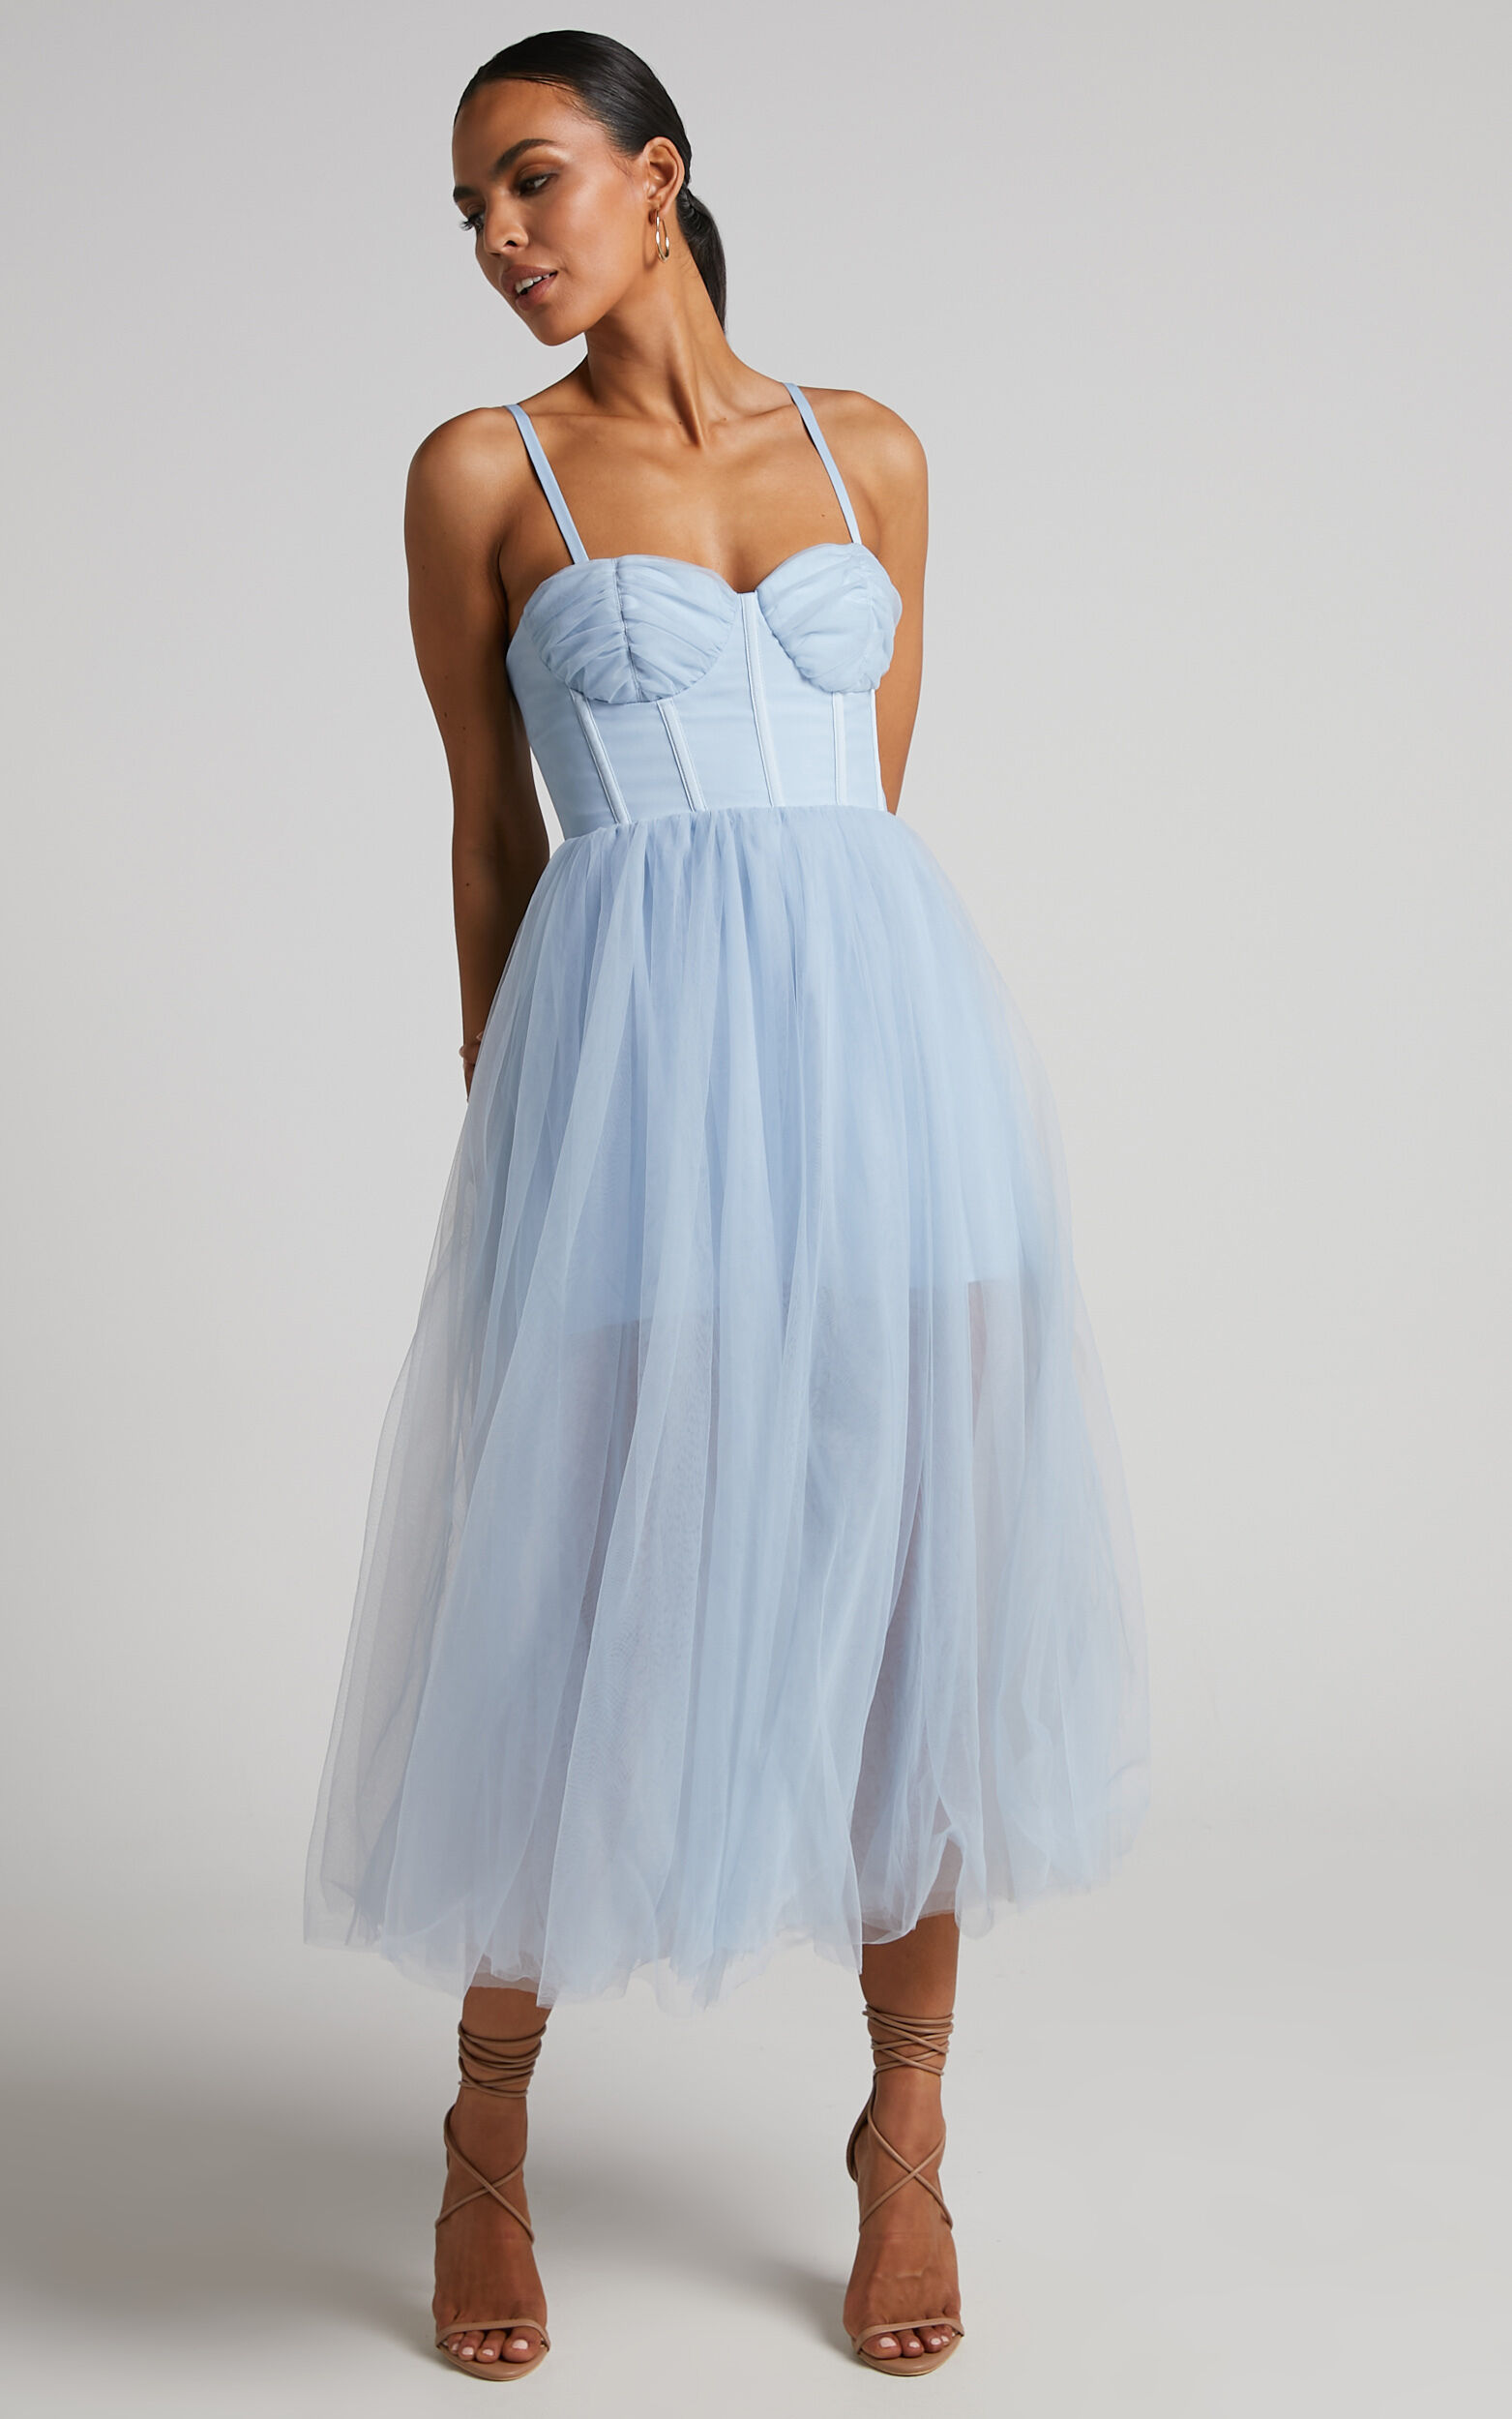 Aisha Bustier Bodice Tulle Midi Dress in Ice Blue - 04, BLU1, super-hi-res image number null